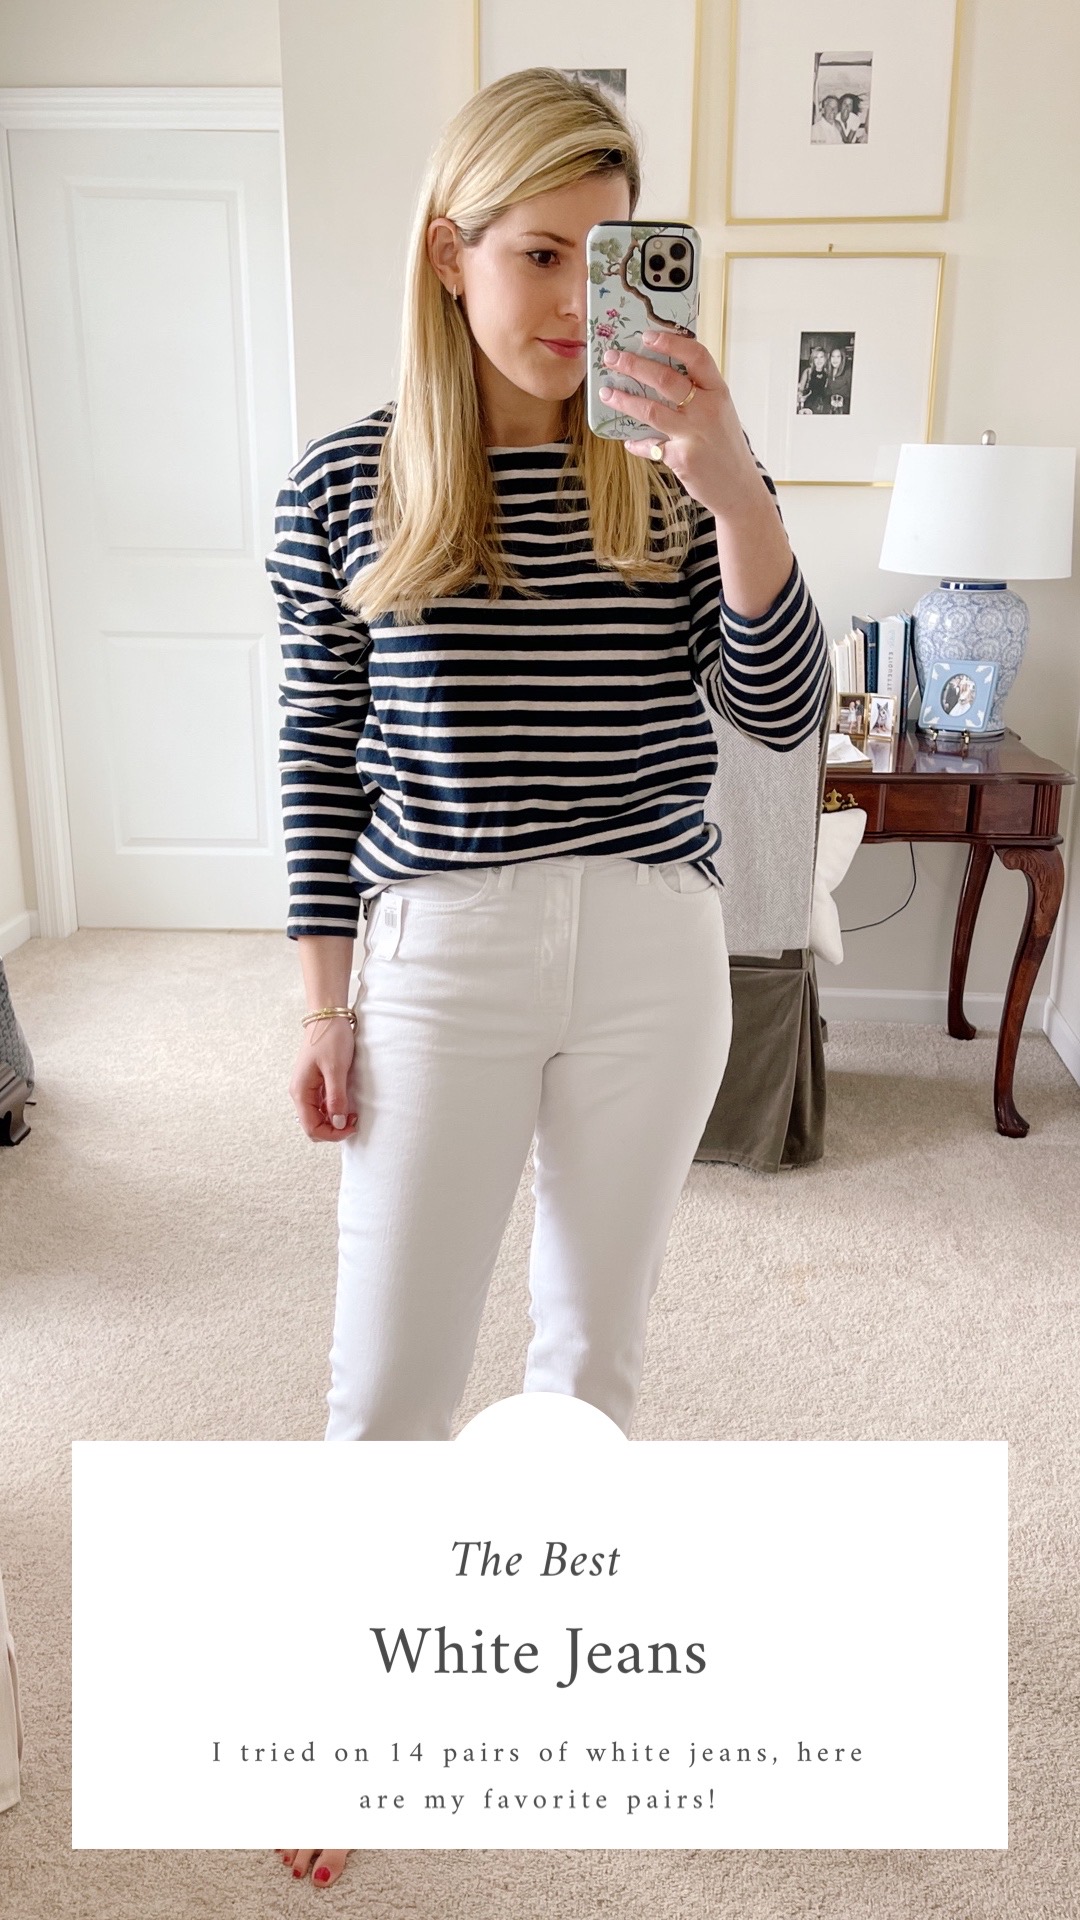 Summer Wind: I Tried On 14 Pairs of White Jeans, Here Are My Favorites